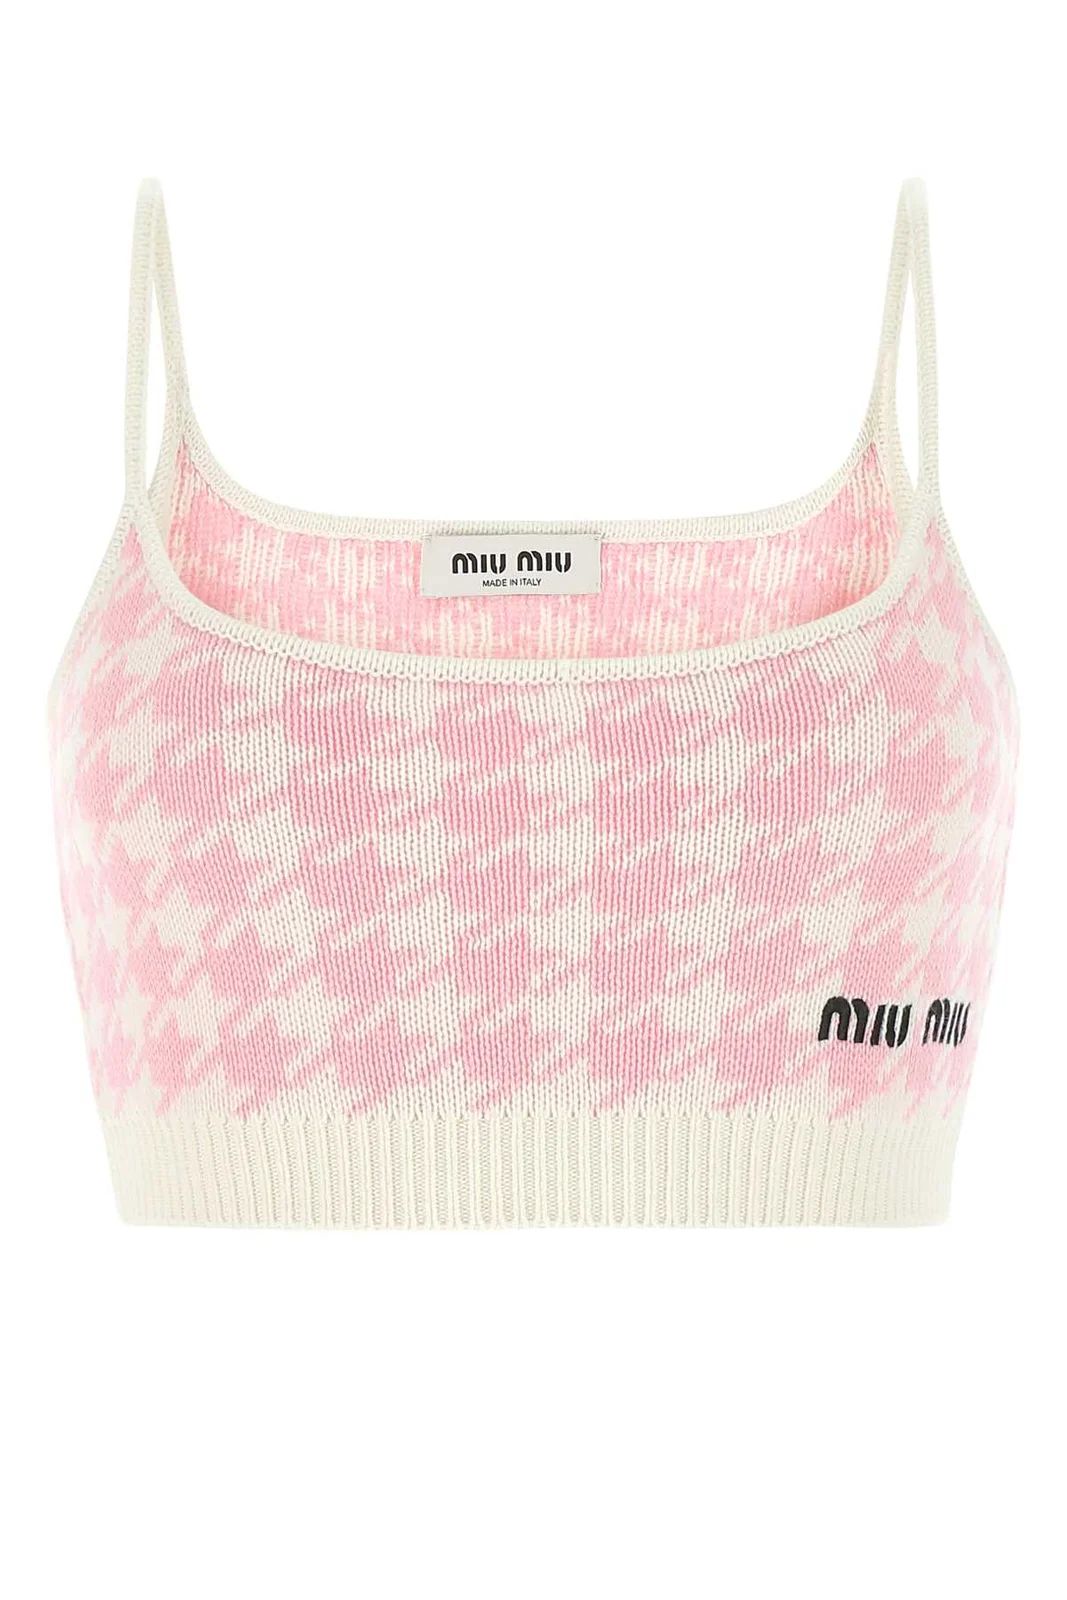 Miu Miu Houndstooth Pattern Logo Embroidered Knitted Top | Cettire Global